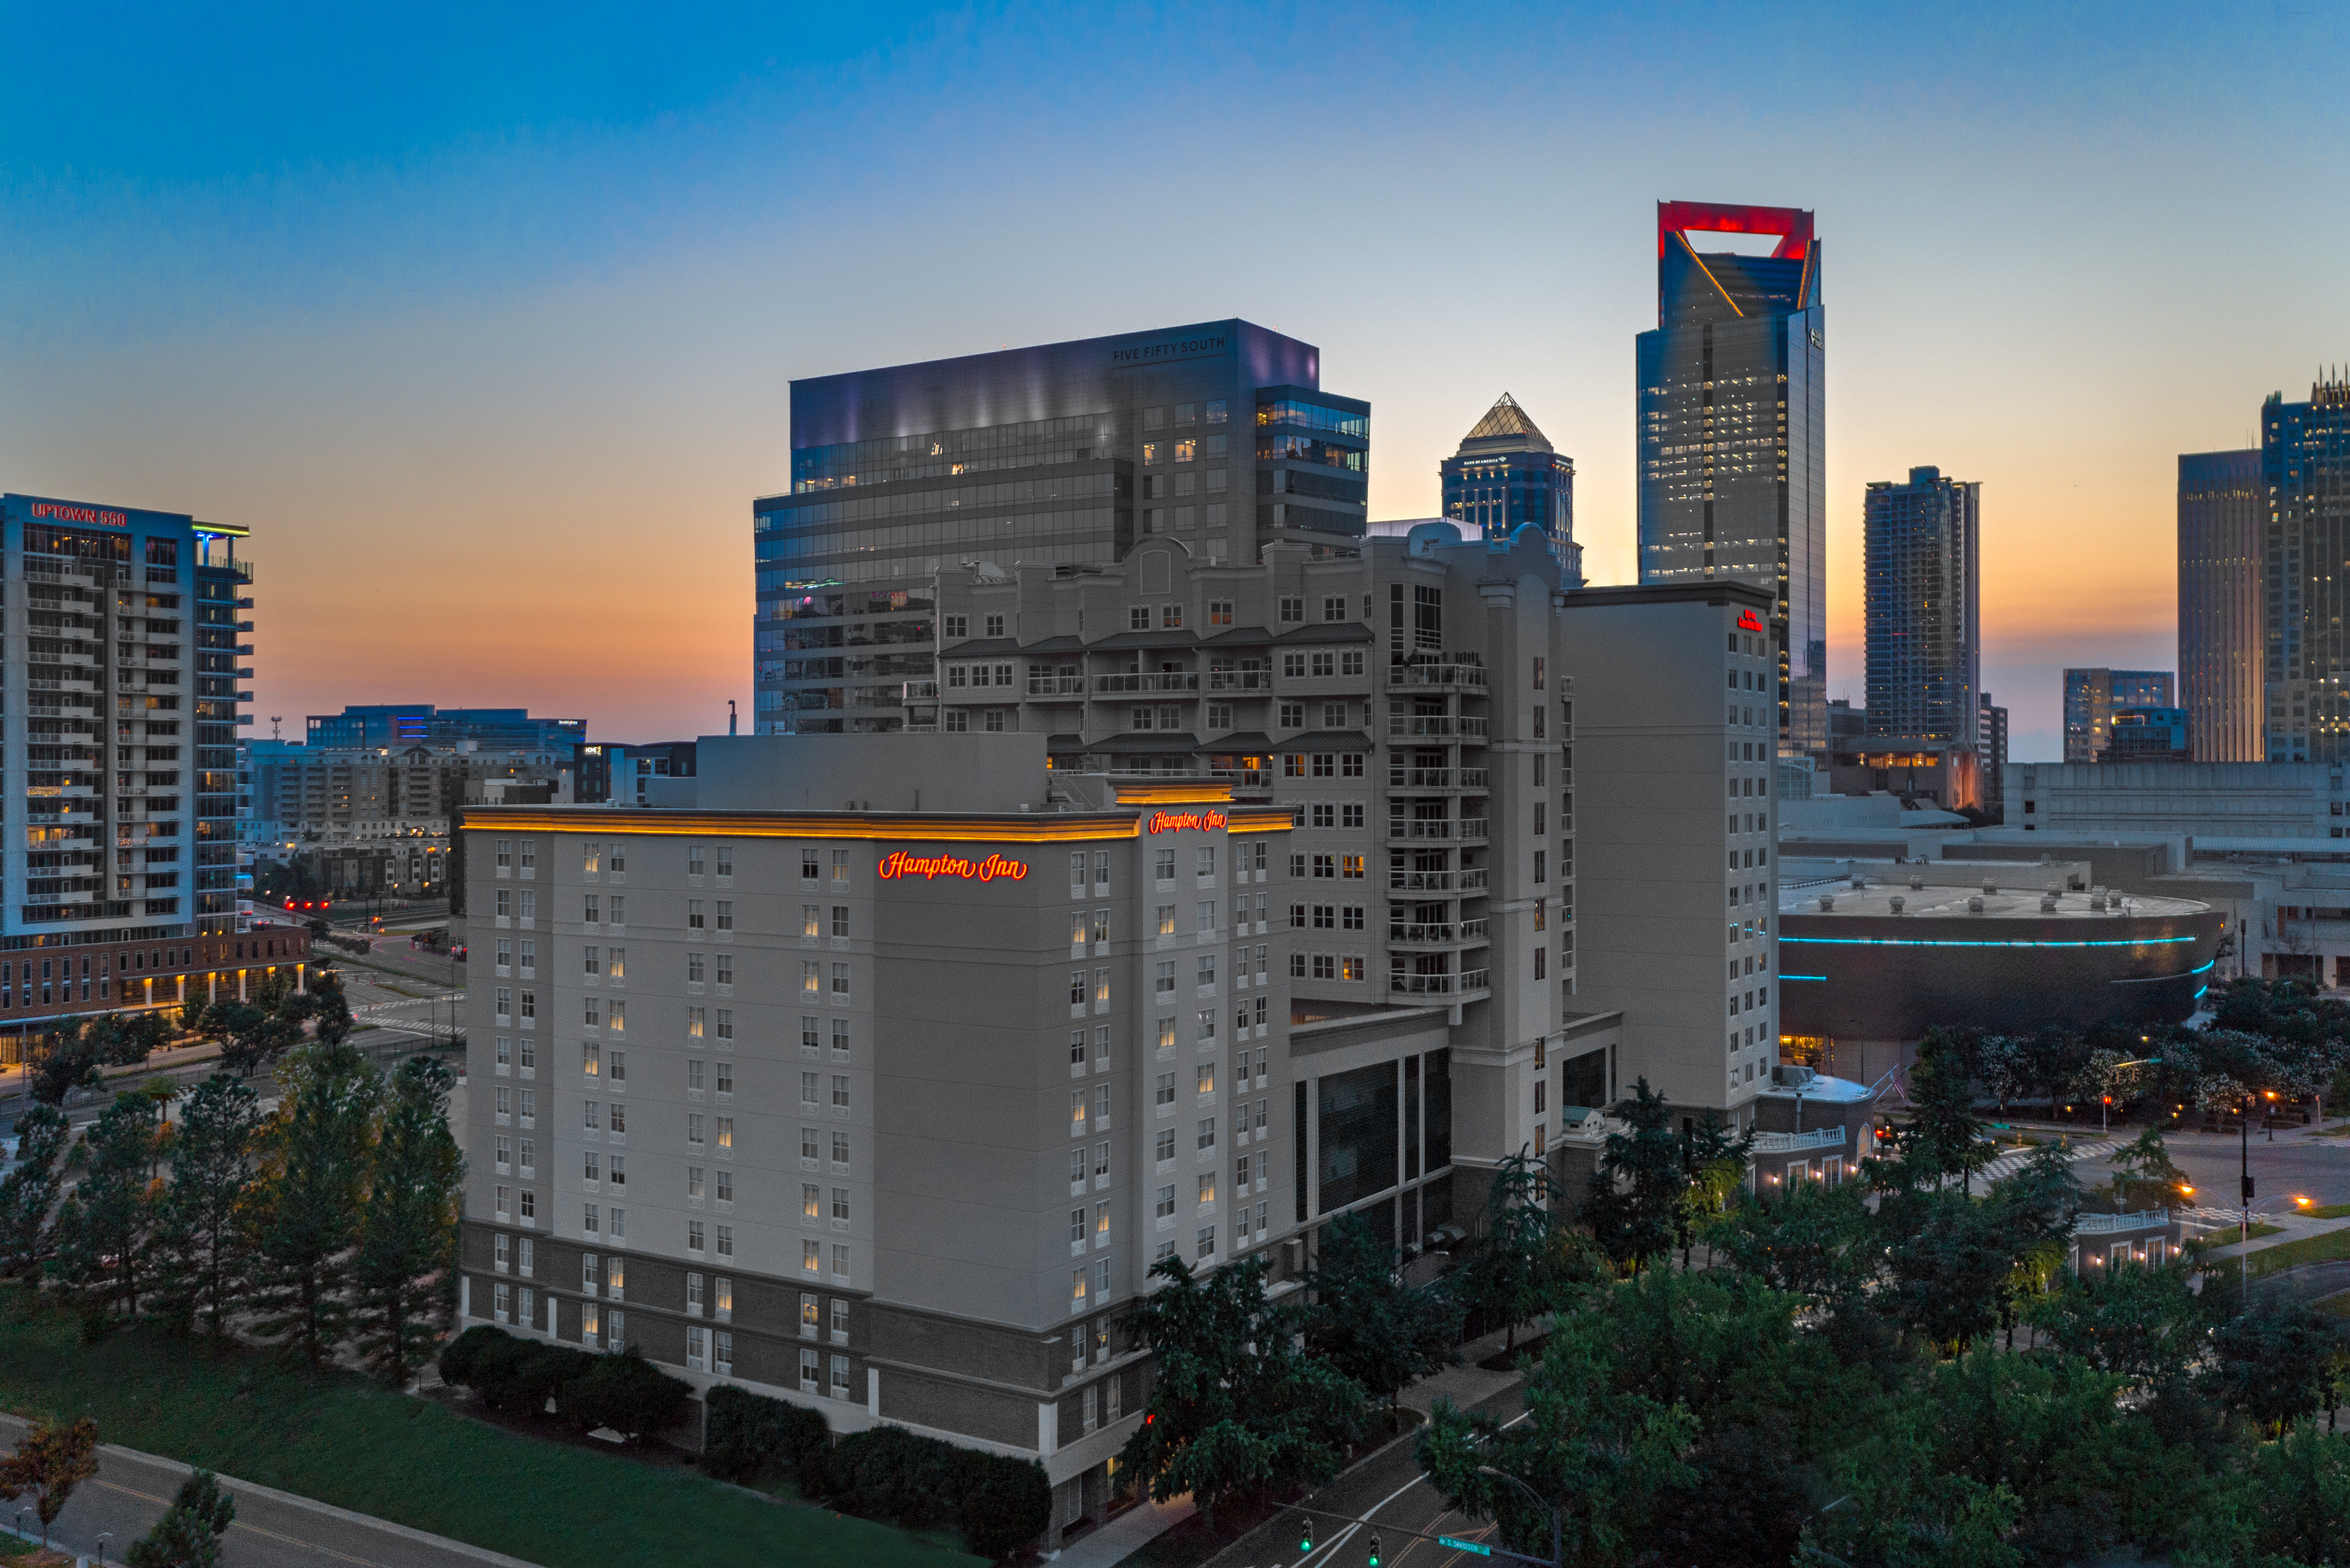 Hotel Exterior at dusk with surrounding buildings